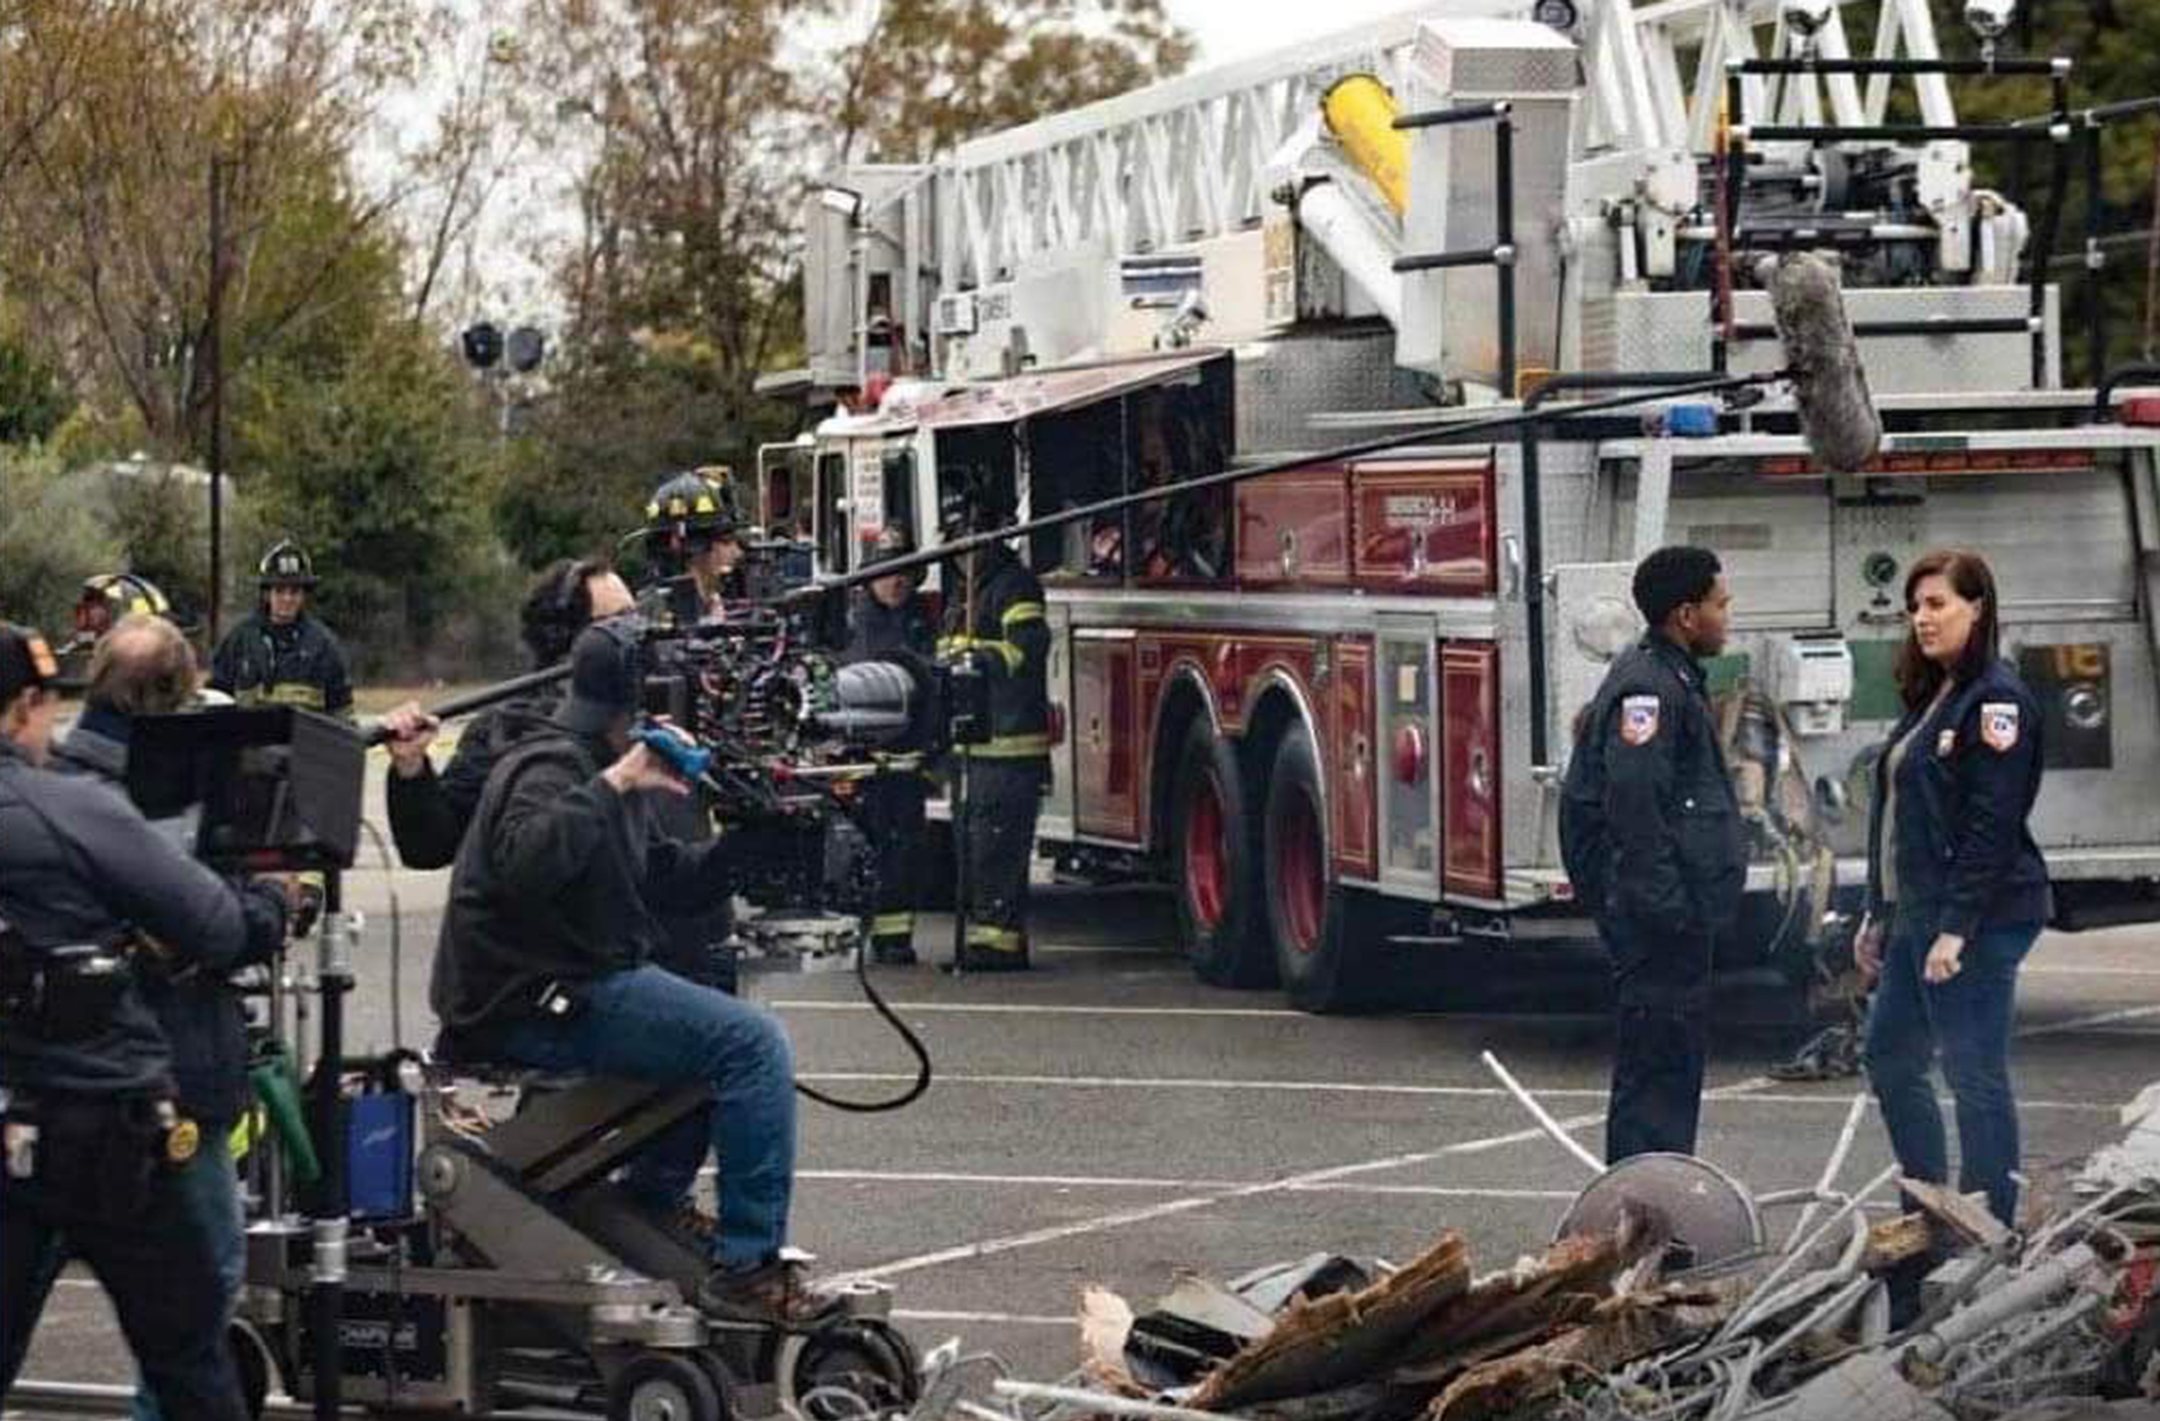 Two actors speak in front of a fire truck on a street while a crew films them on the left